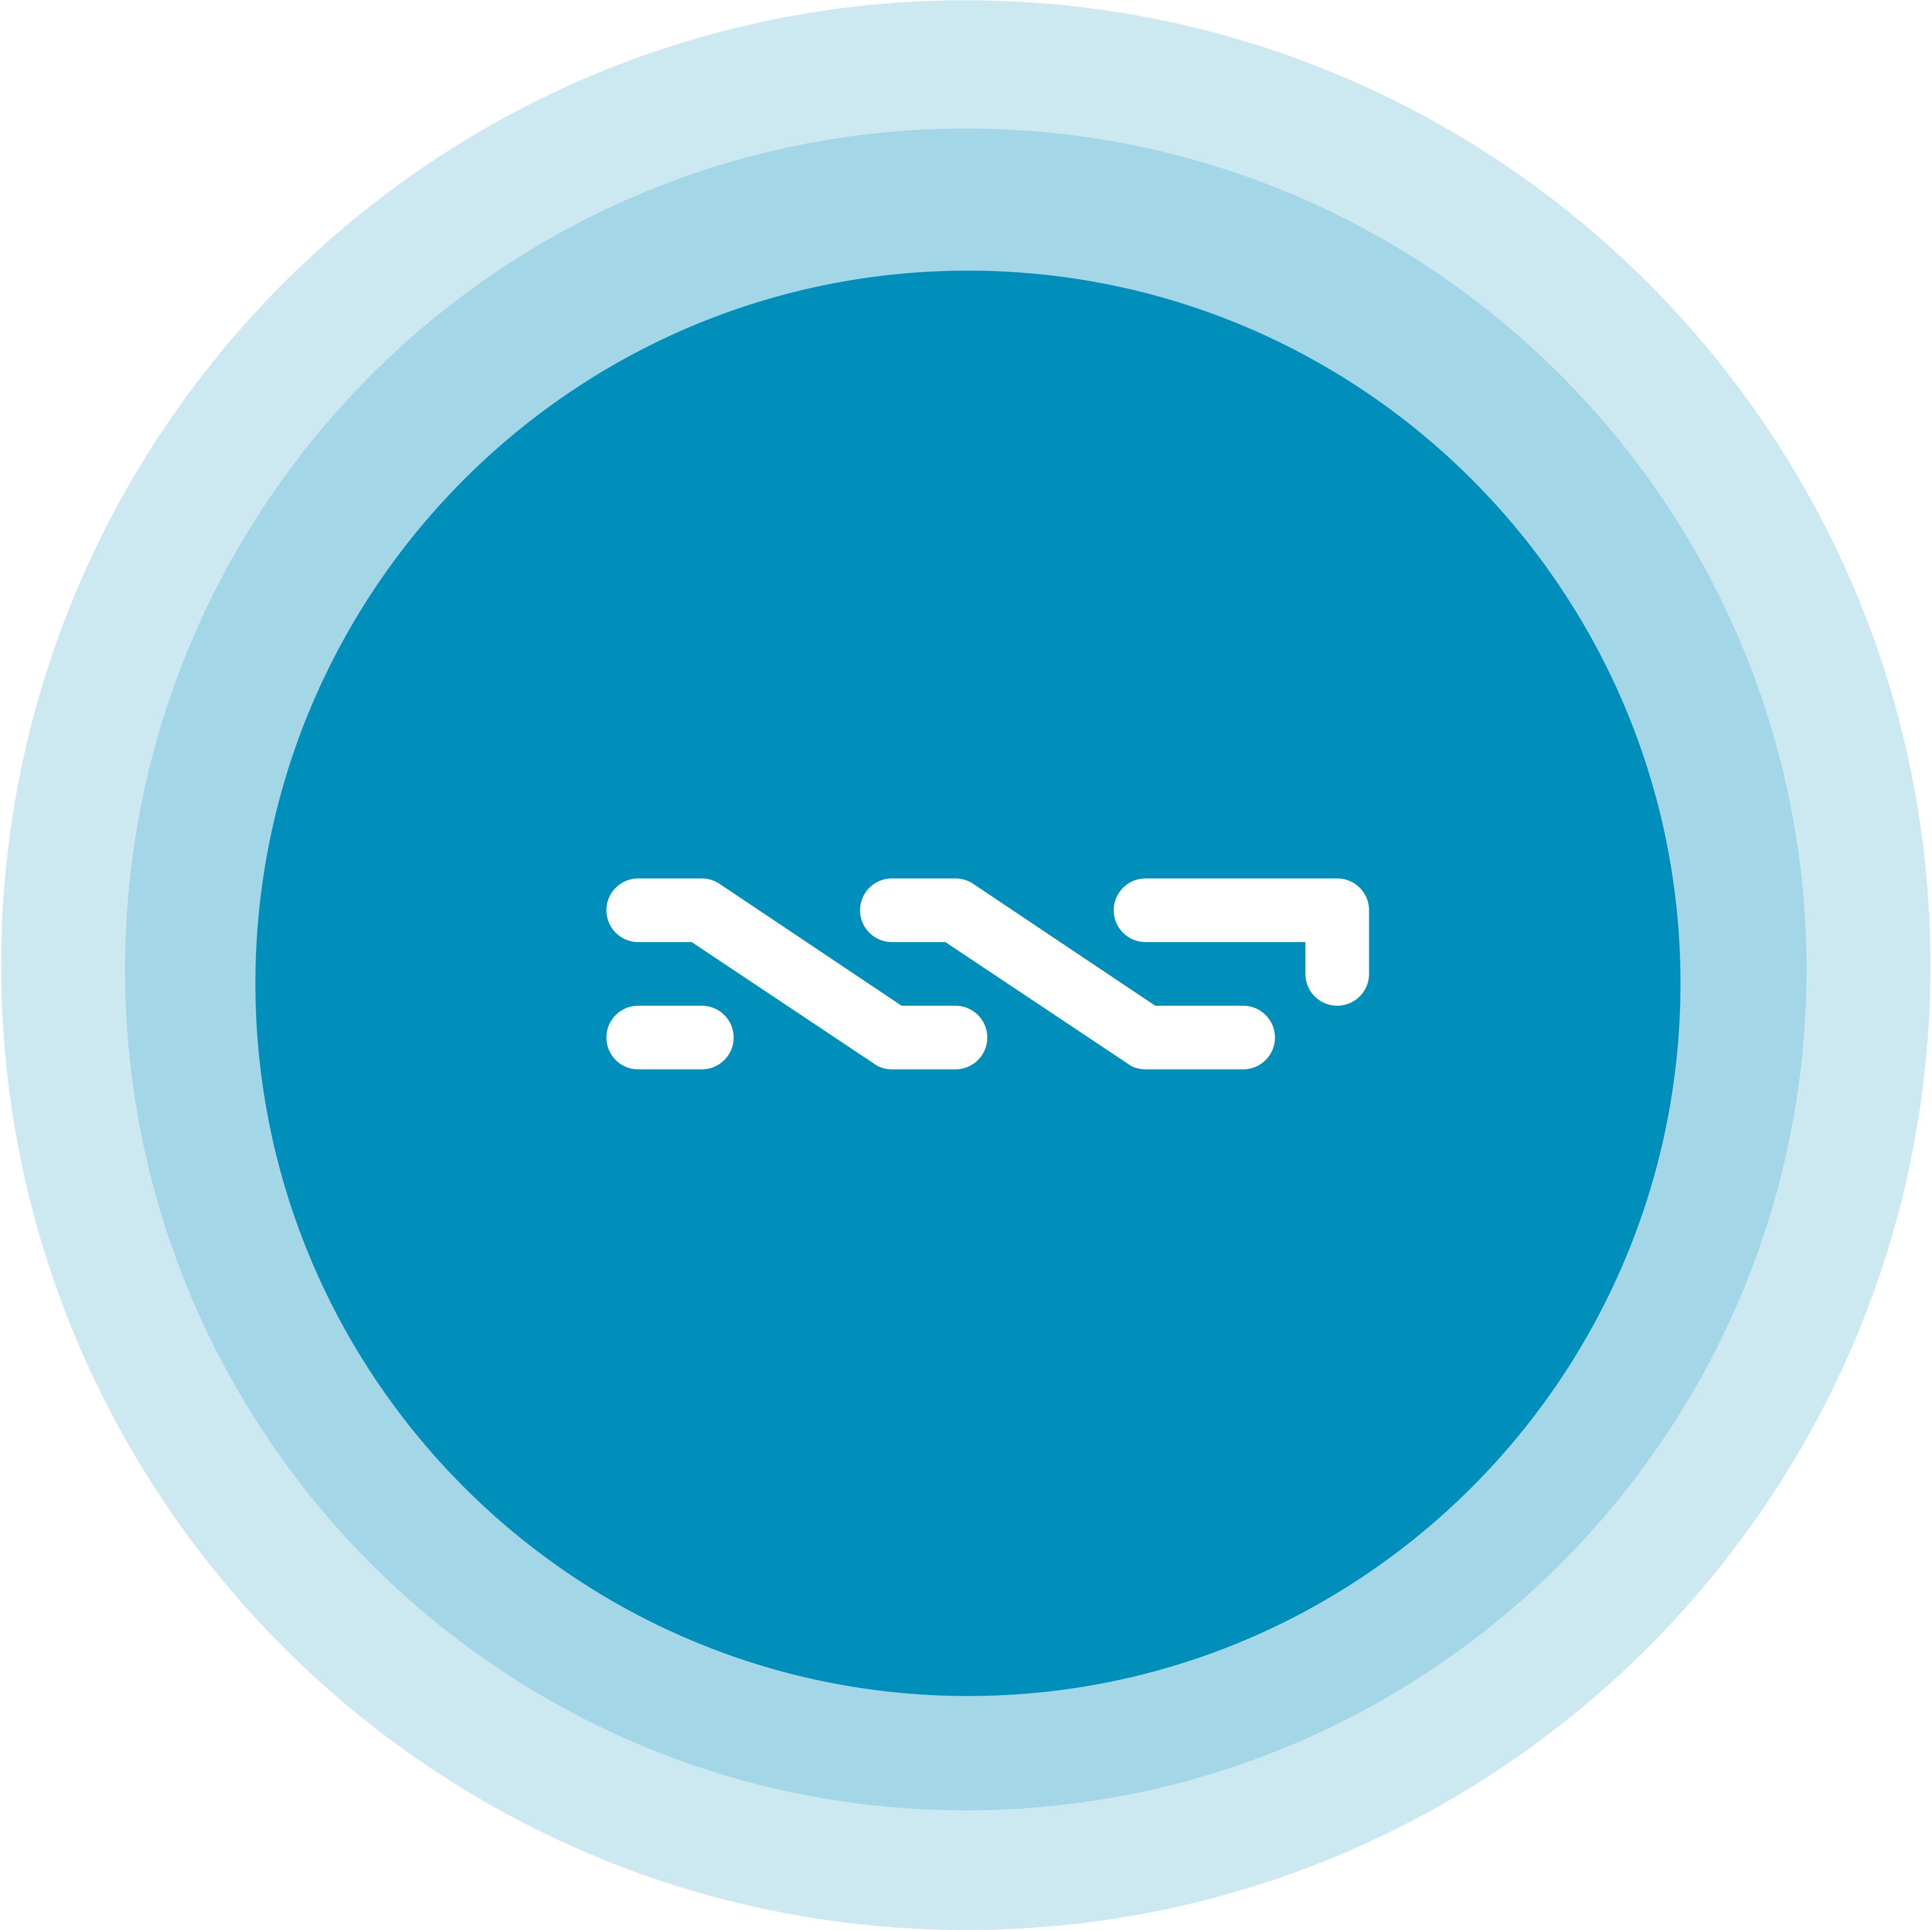 Round Blue Logo - File:Nxt-logo-round-blue-transparent.png - Wikimedia Commons